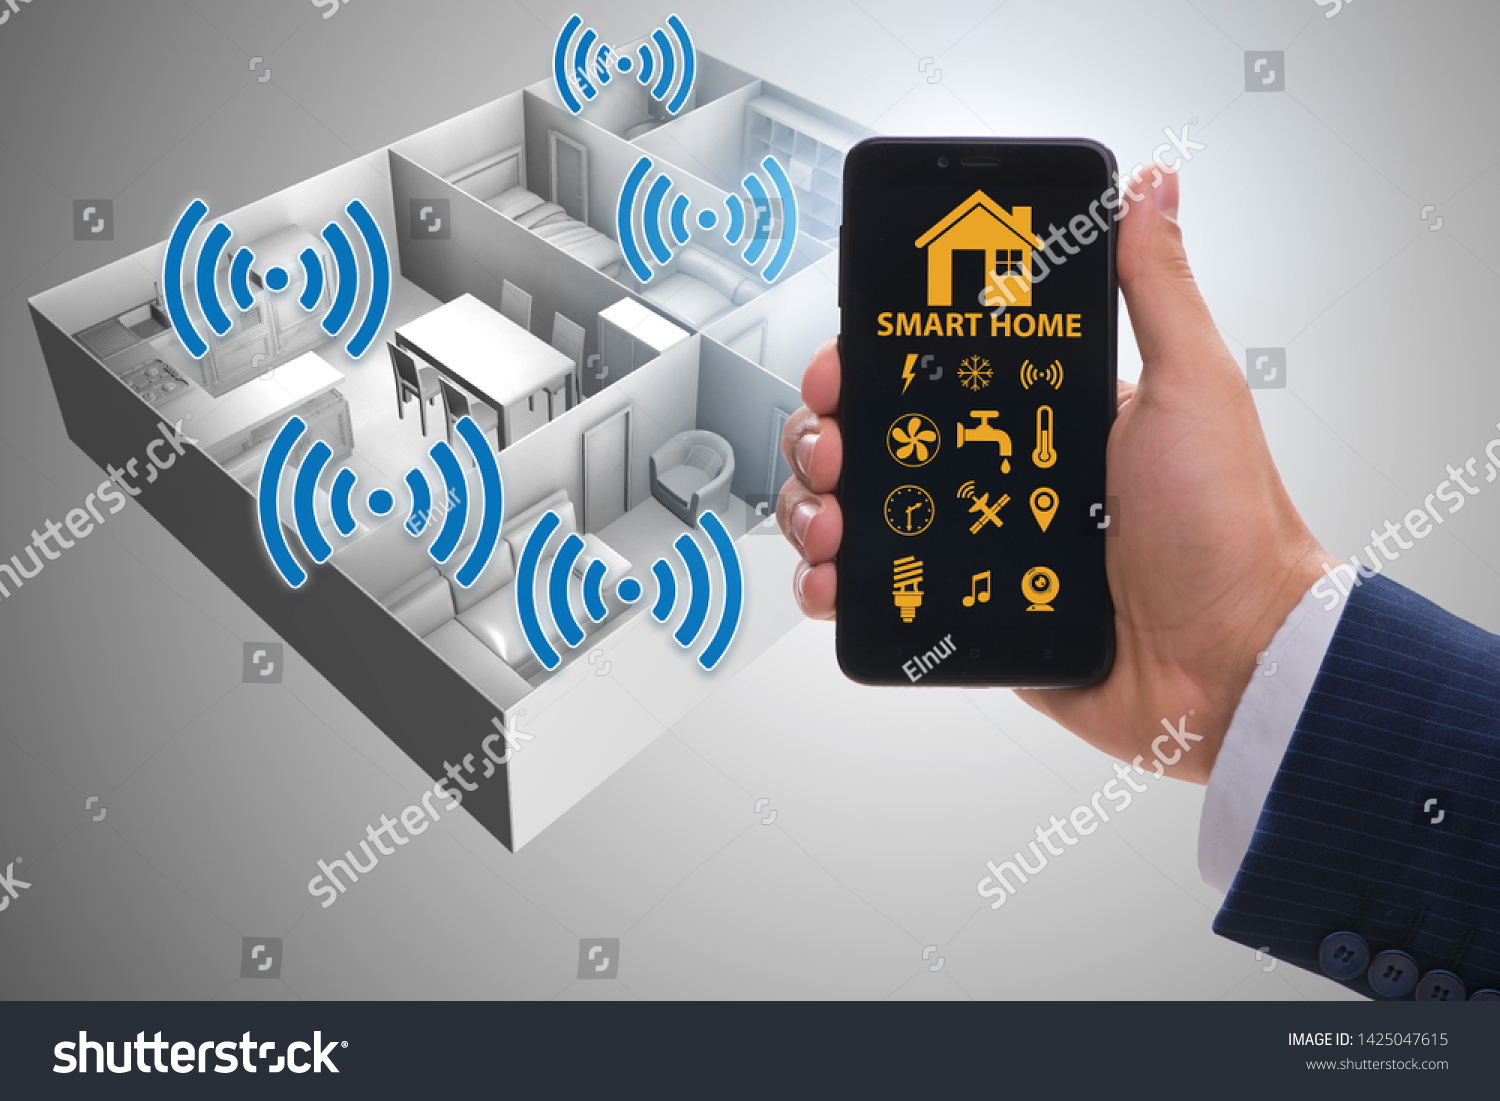 Smart home concept with devices and appliances #1425047615